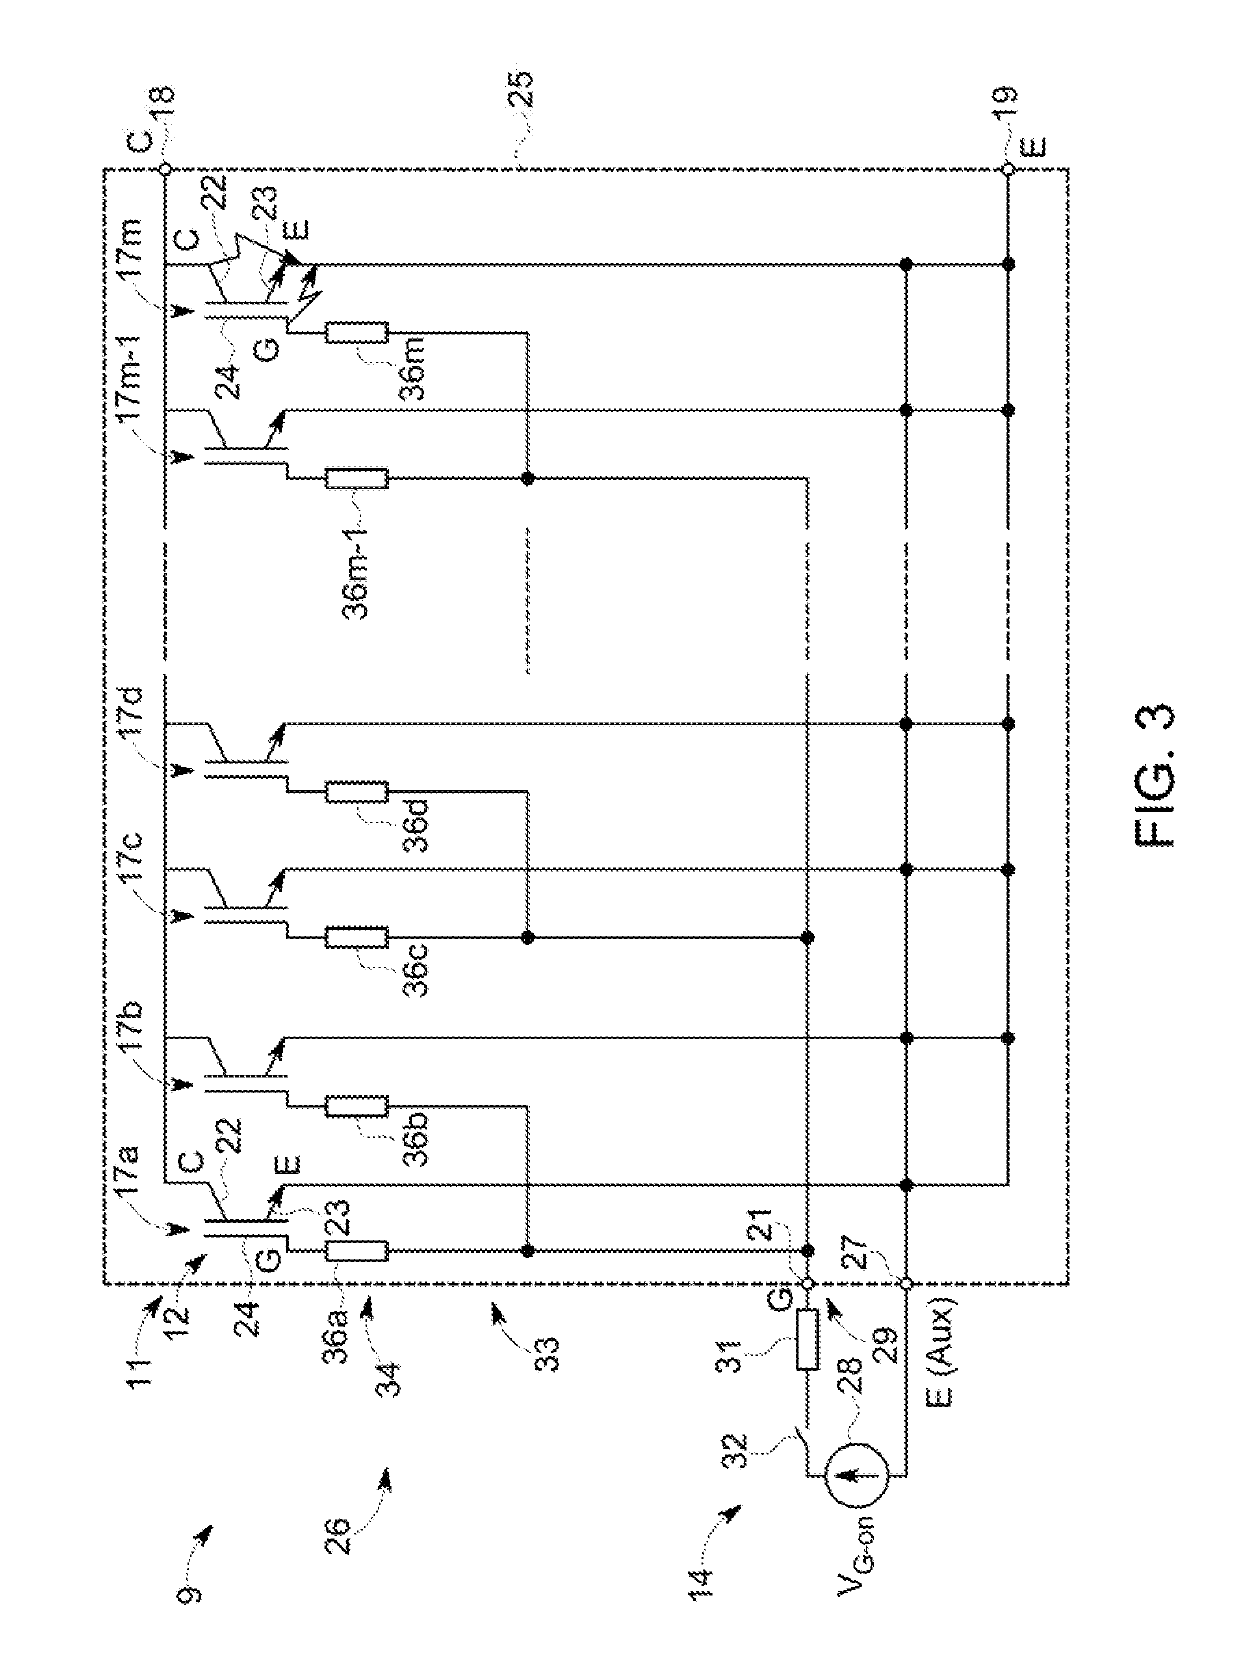 Circuit arrangement and method for gate-controlled power semiconductor devices